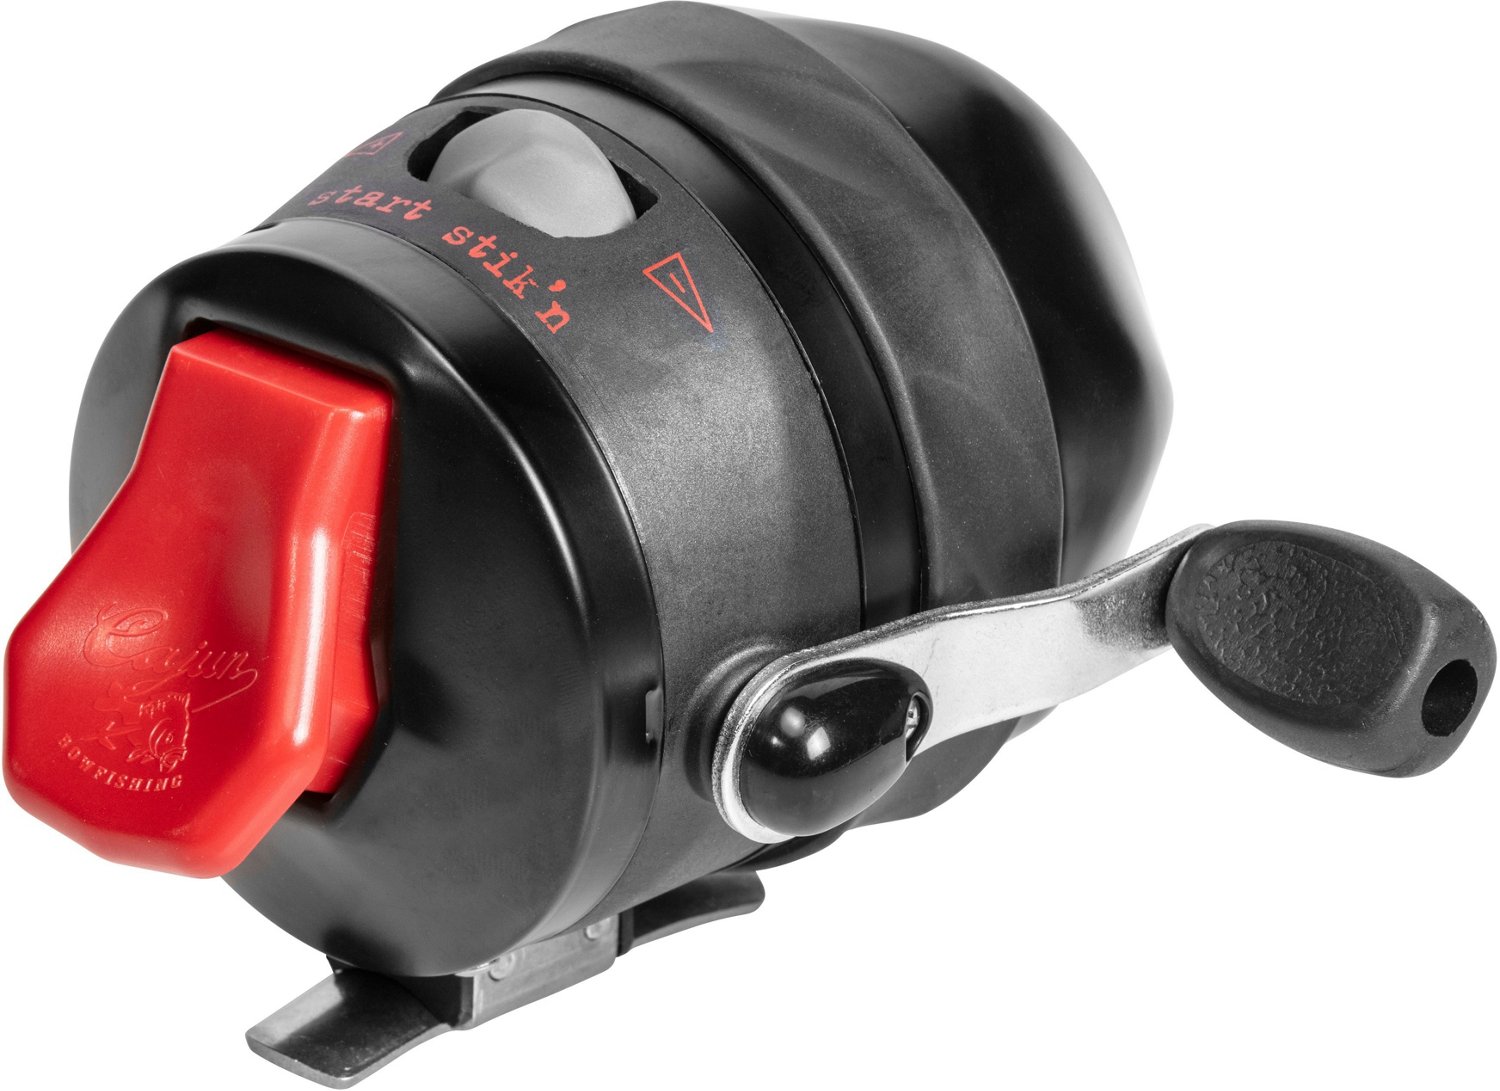 Academy Sports + Outdoors Cajun Bowfishing Spin Doctor Reel